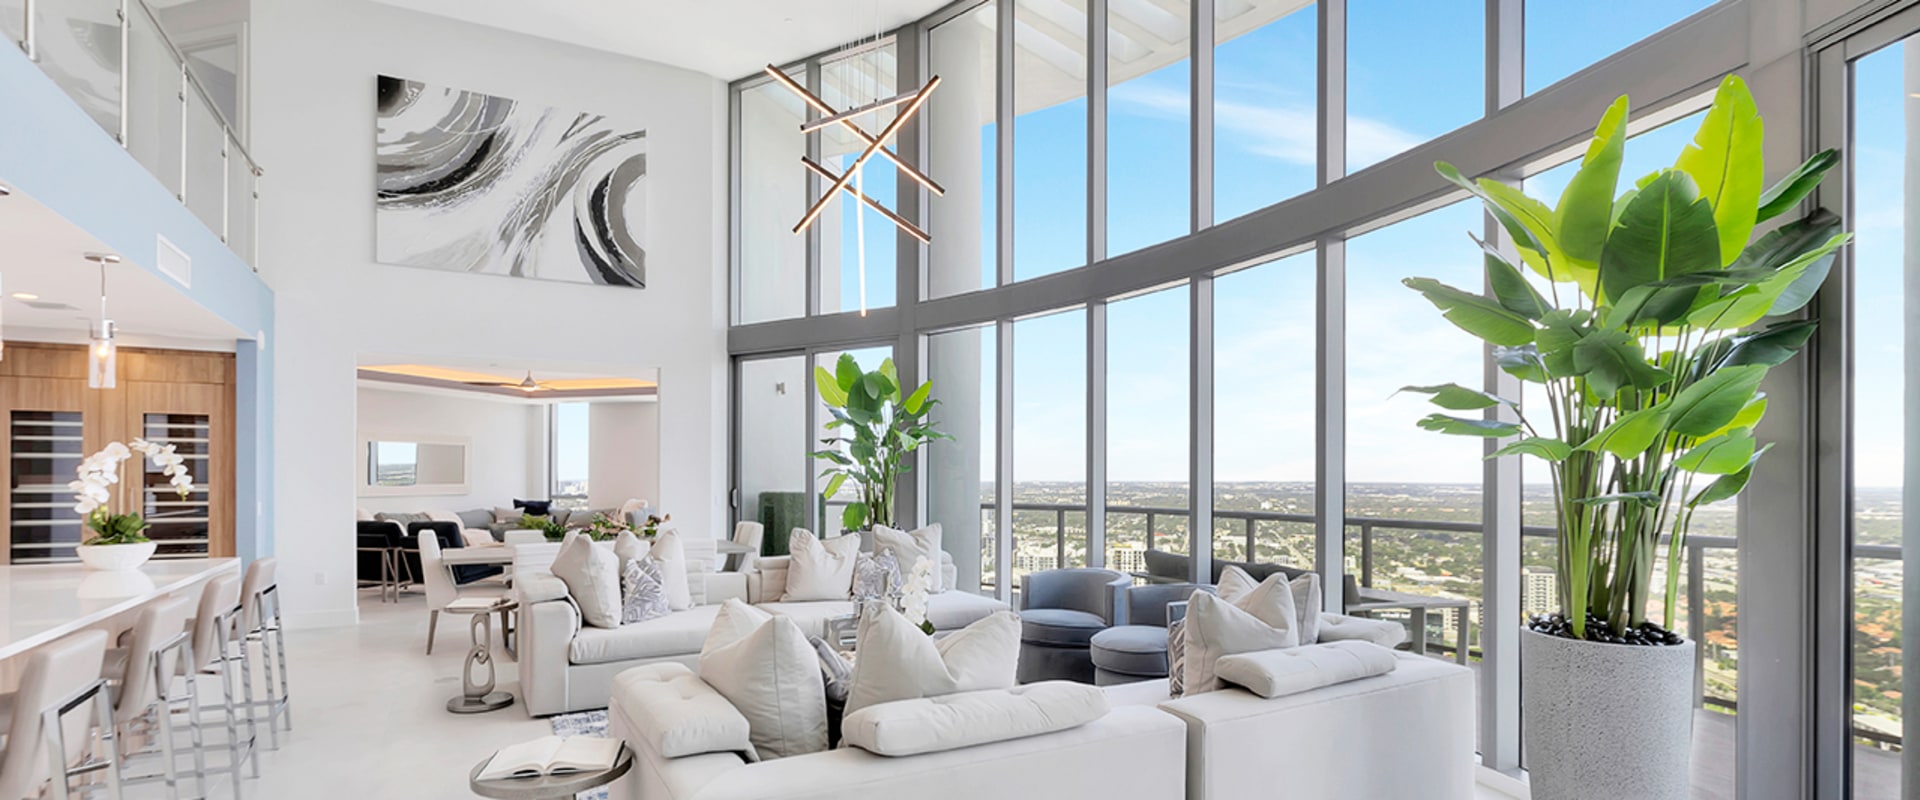 The Average Price of Penthouses in Fort Lauderdale, FL